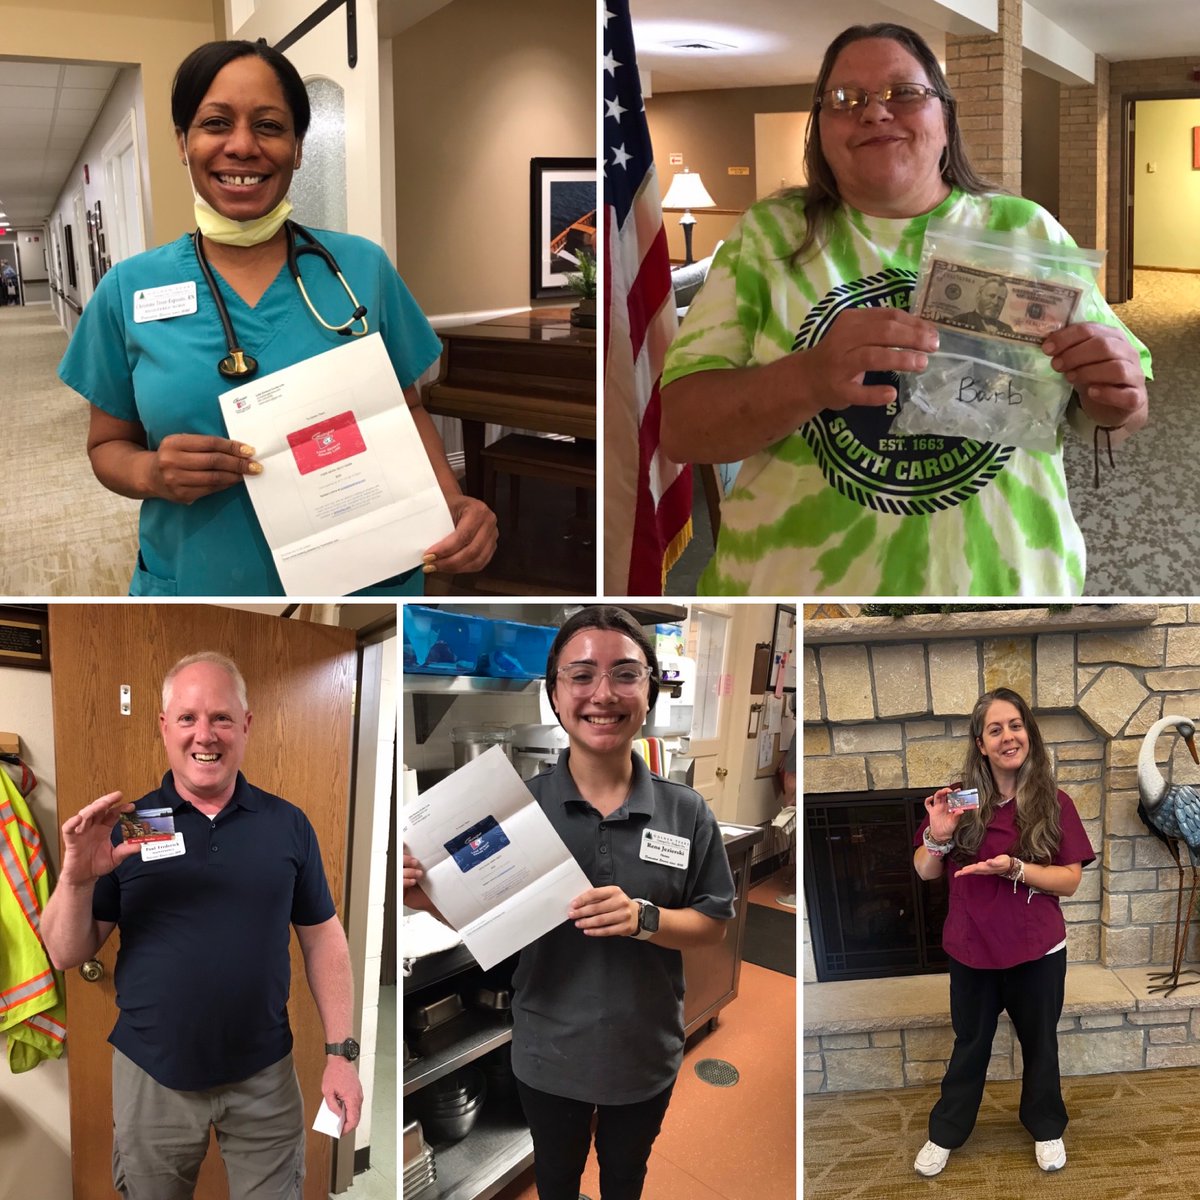 Last month's staff appreciation winners received either $200 to the Lake Geneva Cruise Line, $150 to Kwik Trip, or $100 'cold' hard cash (yes, it was literally two $50 bills delivered on ice!) Congrats to our winners and thank you to all of our incredible staff!! #loveourstaff